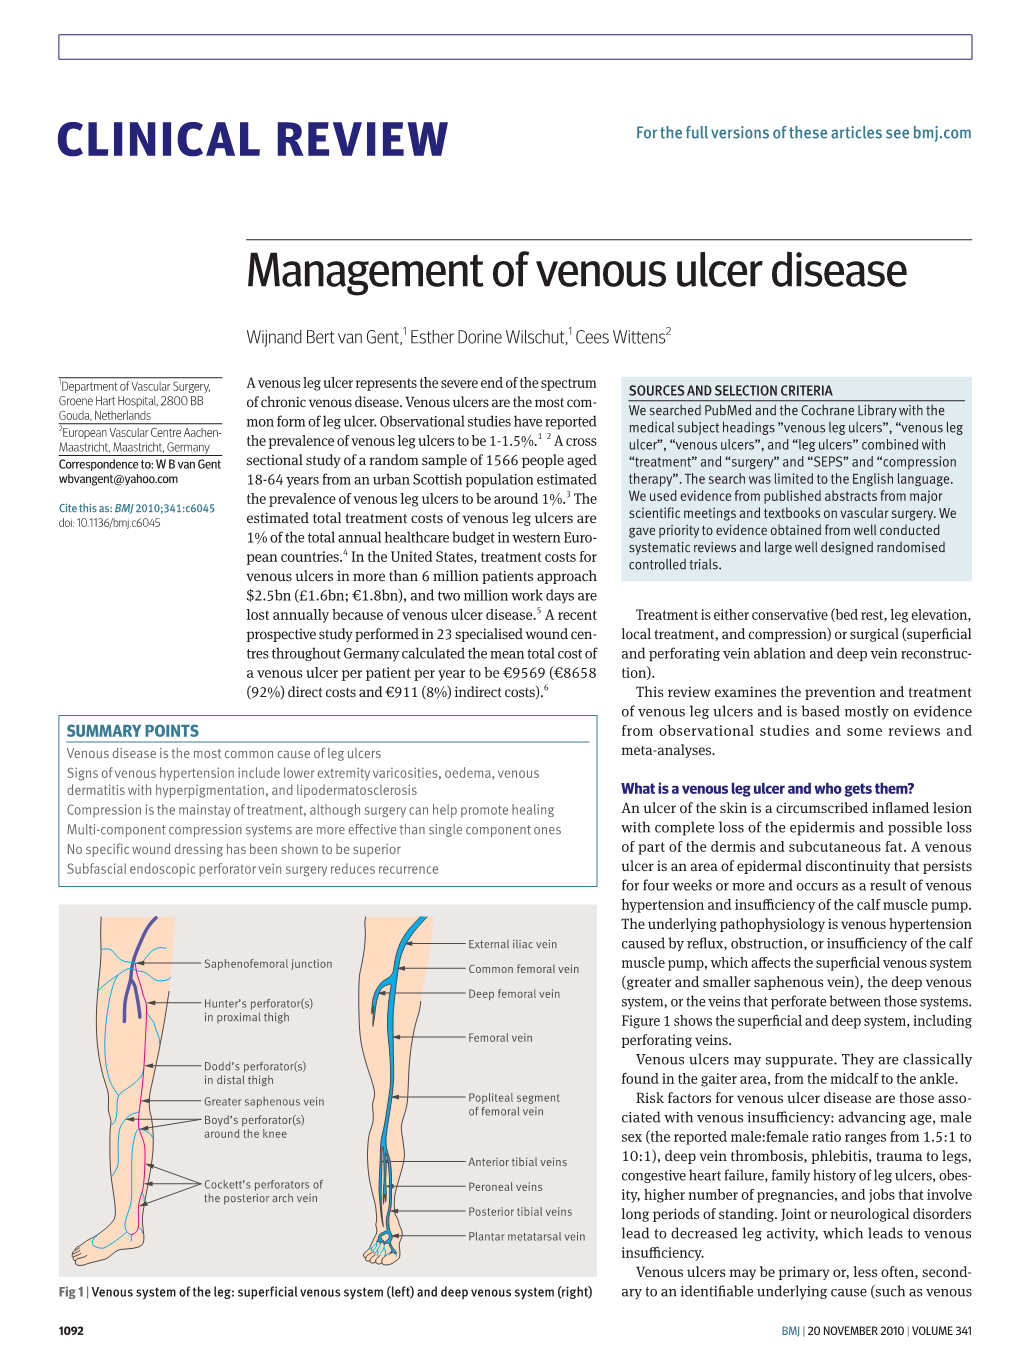 CLINICAL REVIEW Management of Venous Ulcer Disease